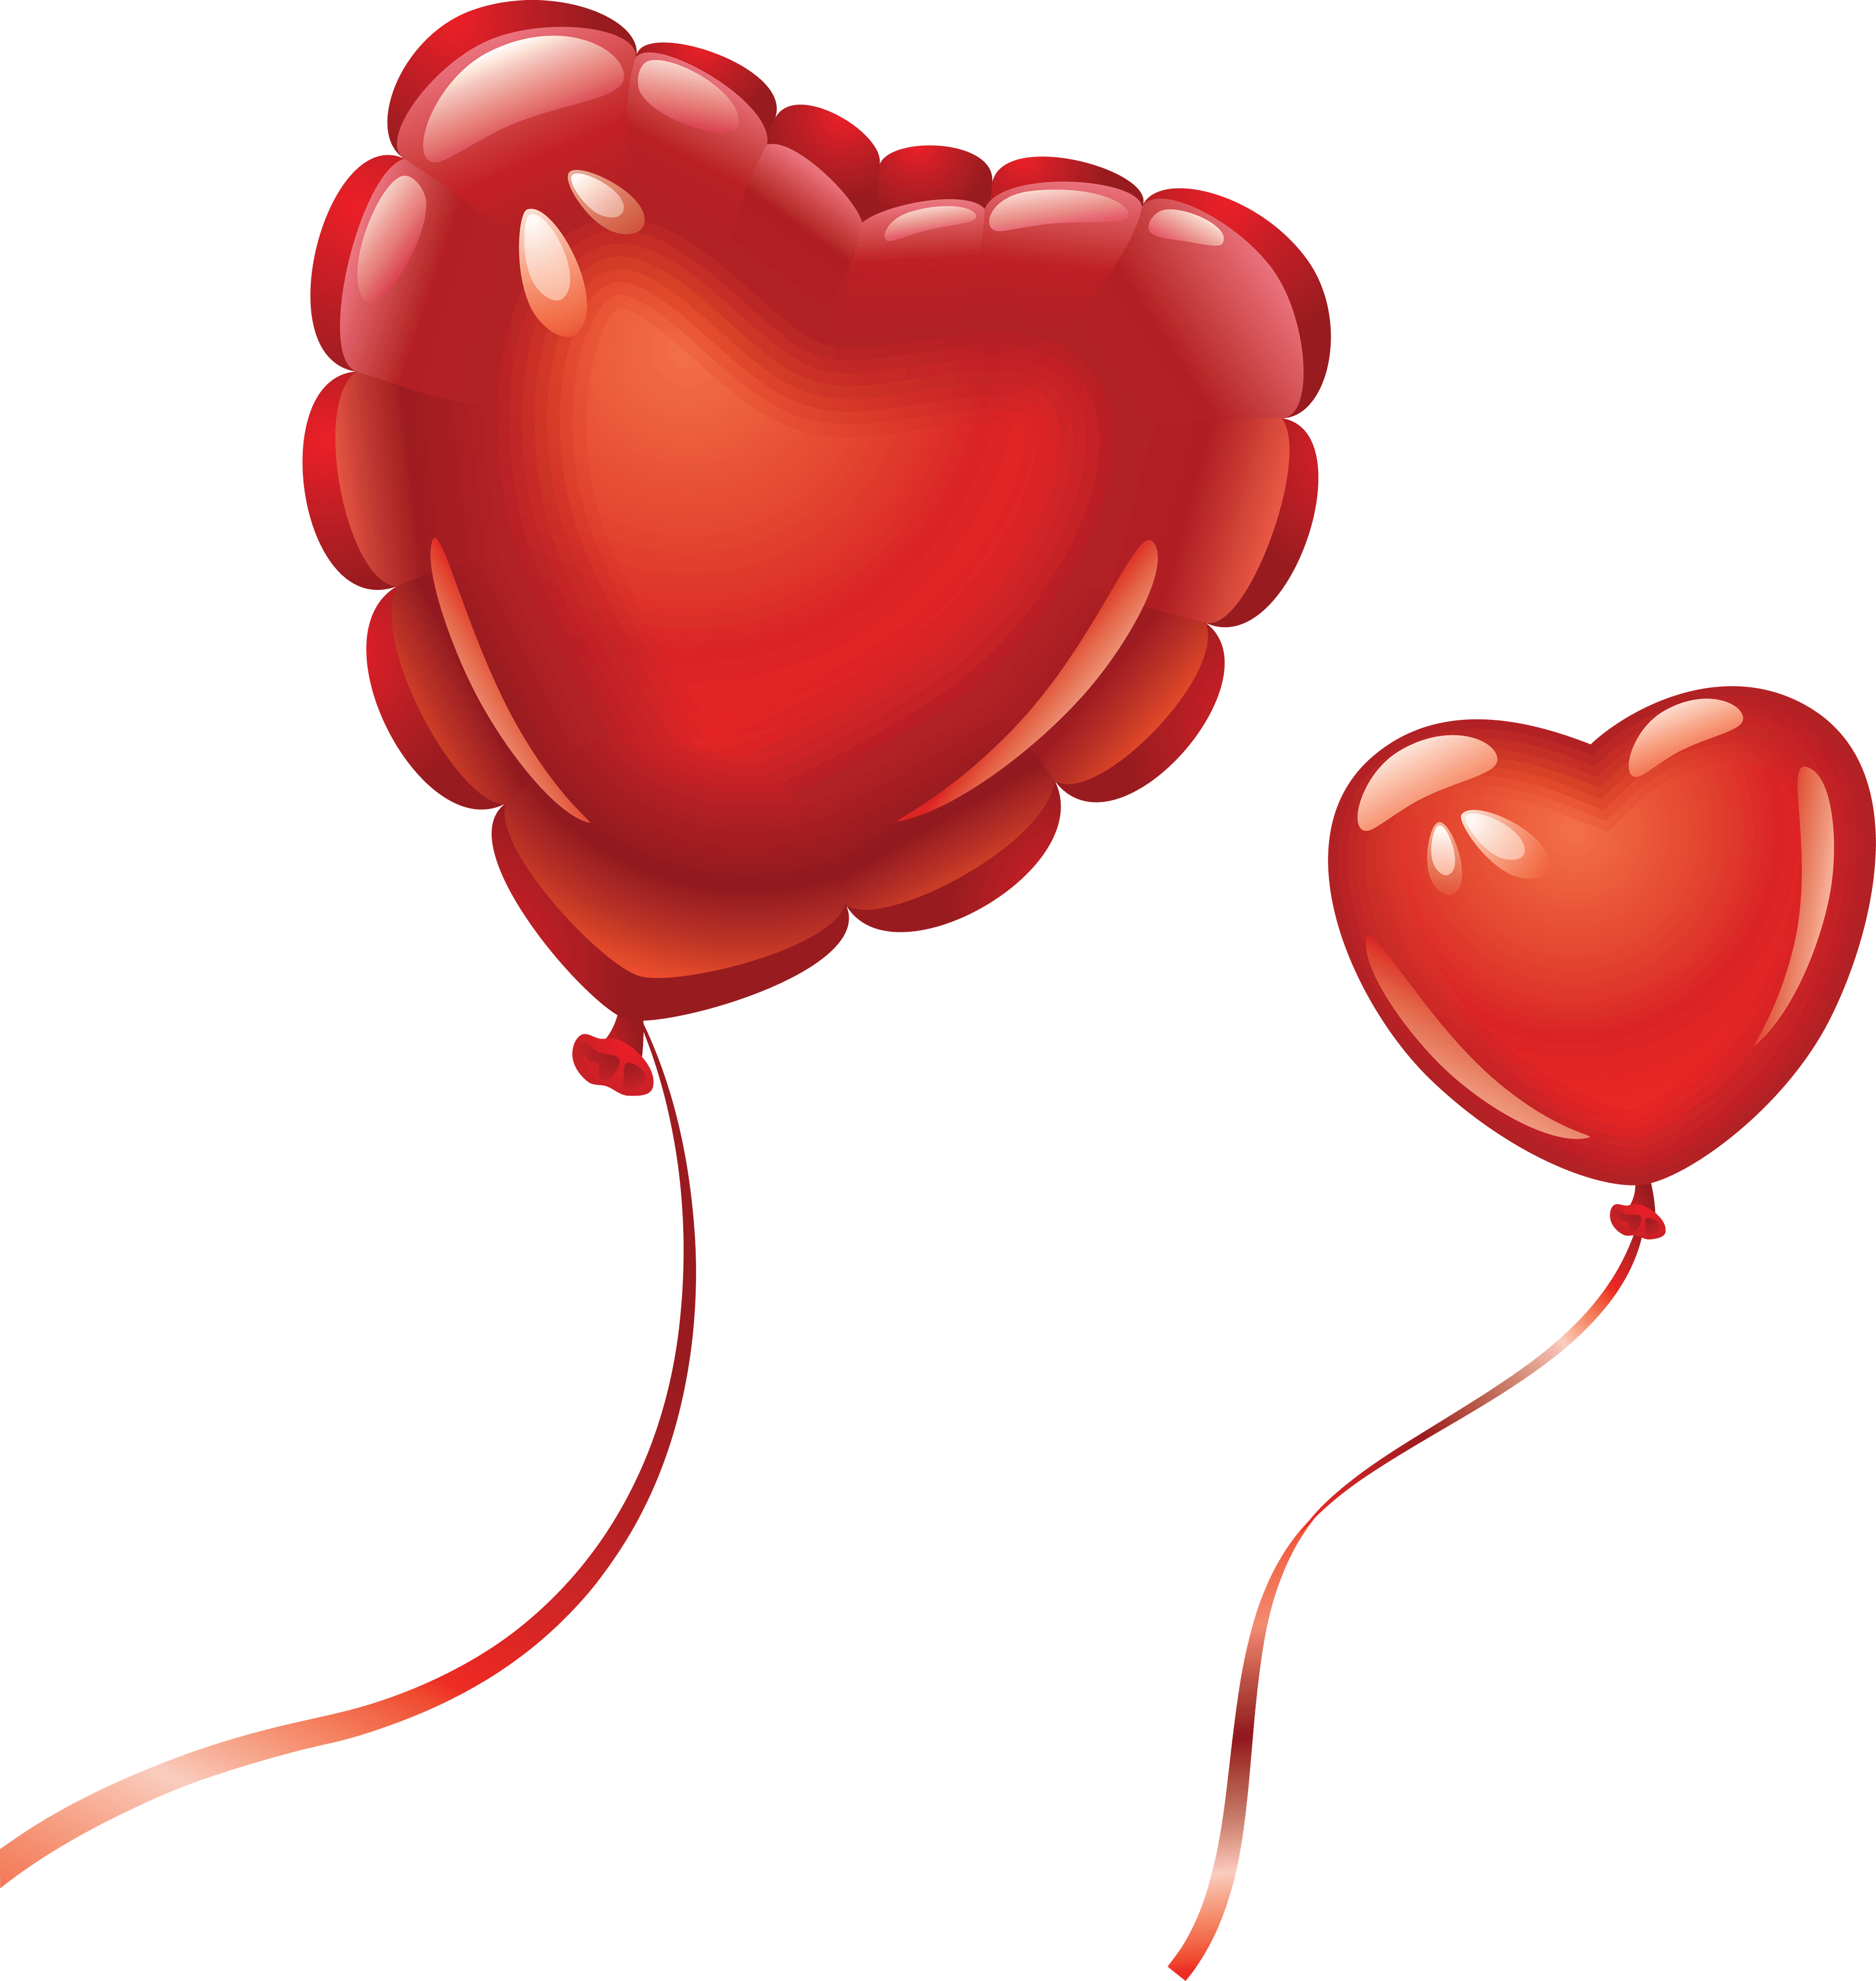 Heart Balloon Png Image Download Heart Balloons PNG Image